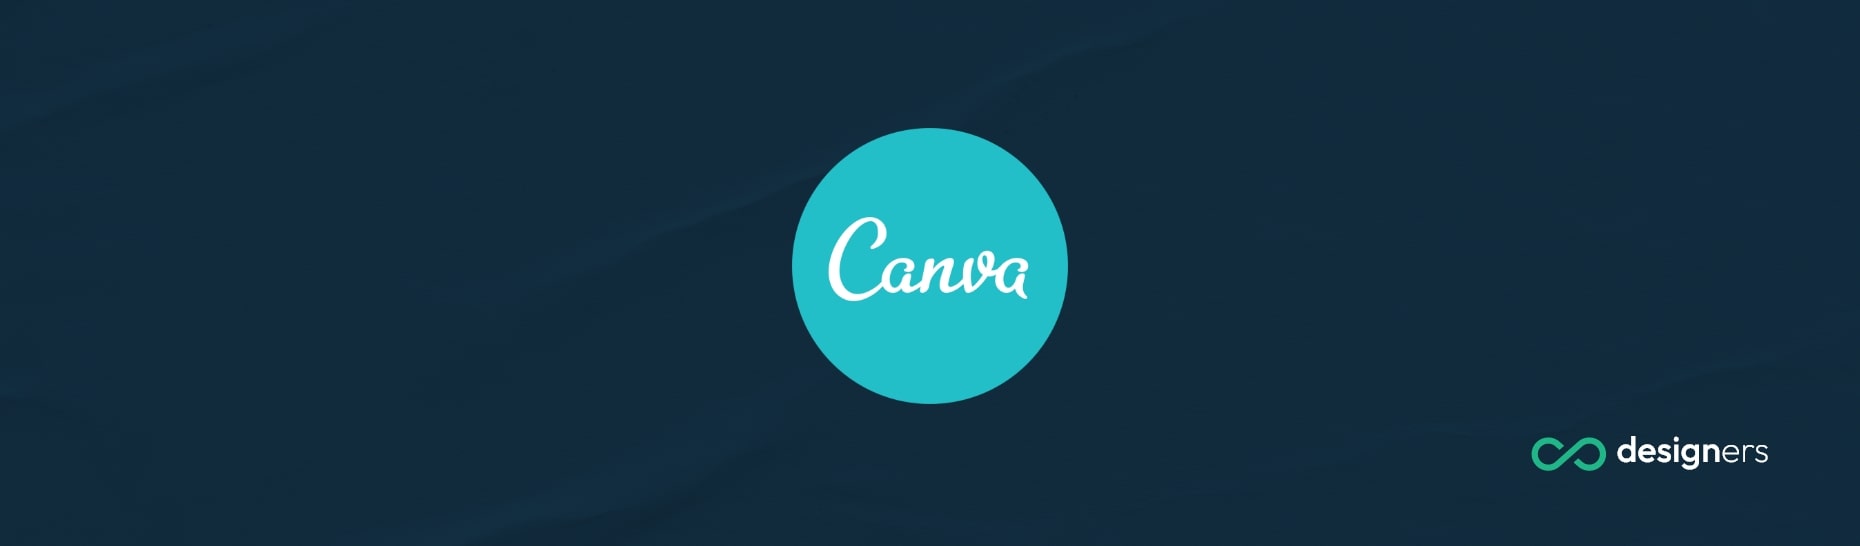 How Do I Download an Editable Template From Canva?